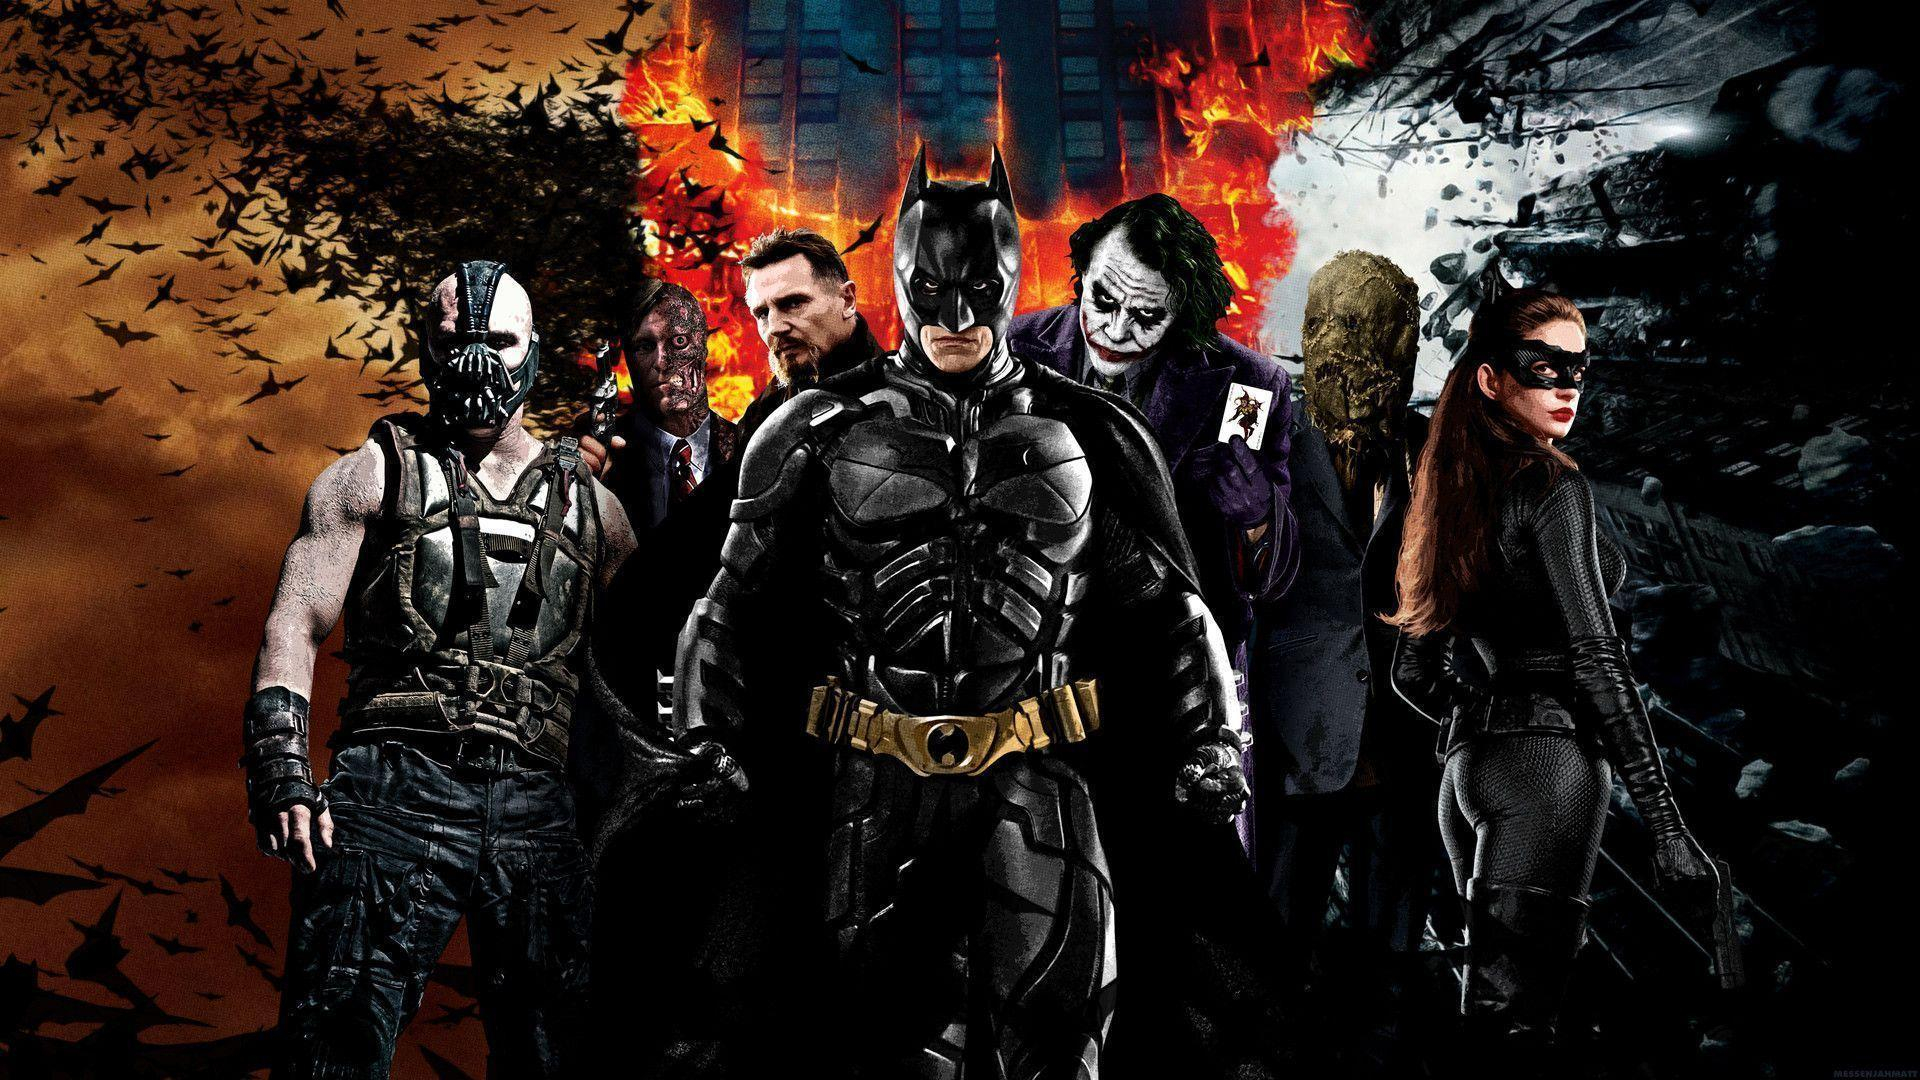 1920x1080 The Dark Knight Trilogy Wallpapers Top Free The Dark Knight Trilogy Backgrounds